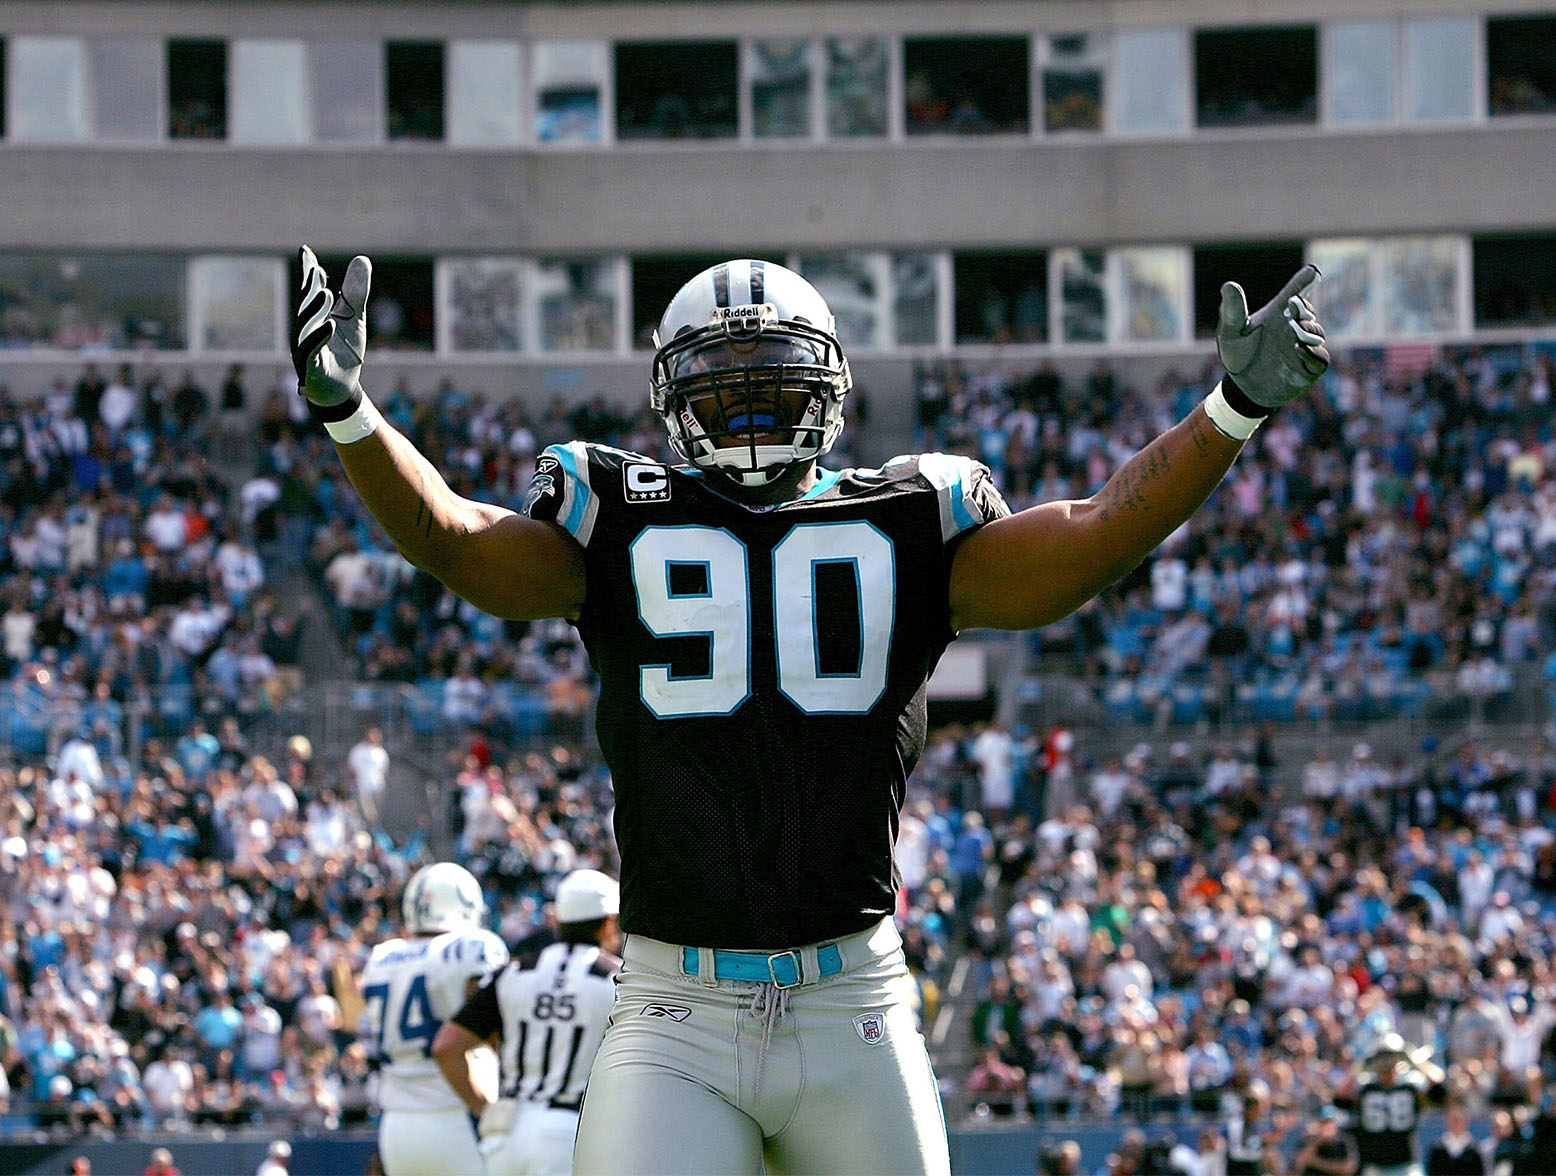 CHARLOTTE, NC - OCTOBER 28: Julius Peppers #90 of the Carolina Panthers celebrates after a defensive stop against the Indianapolis Colts during their game at Bank of America Stadium on October 28, 2007 in Charlotte, North Carolina. (Photo by Streeter Lecka/Getty Images)